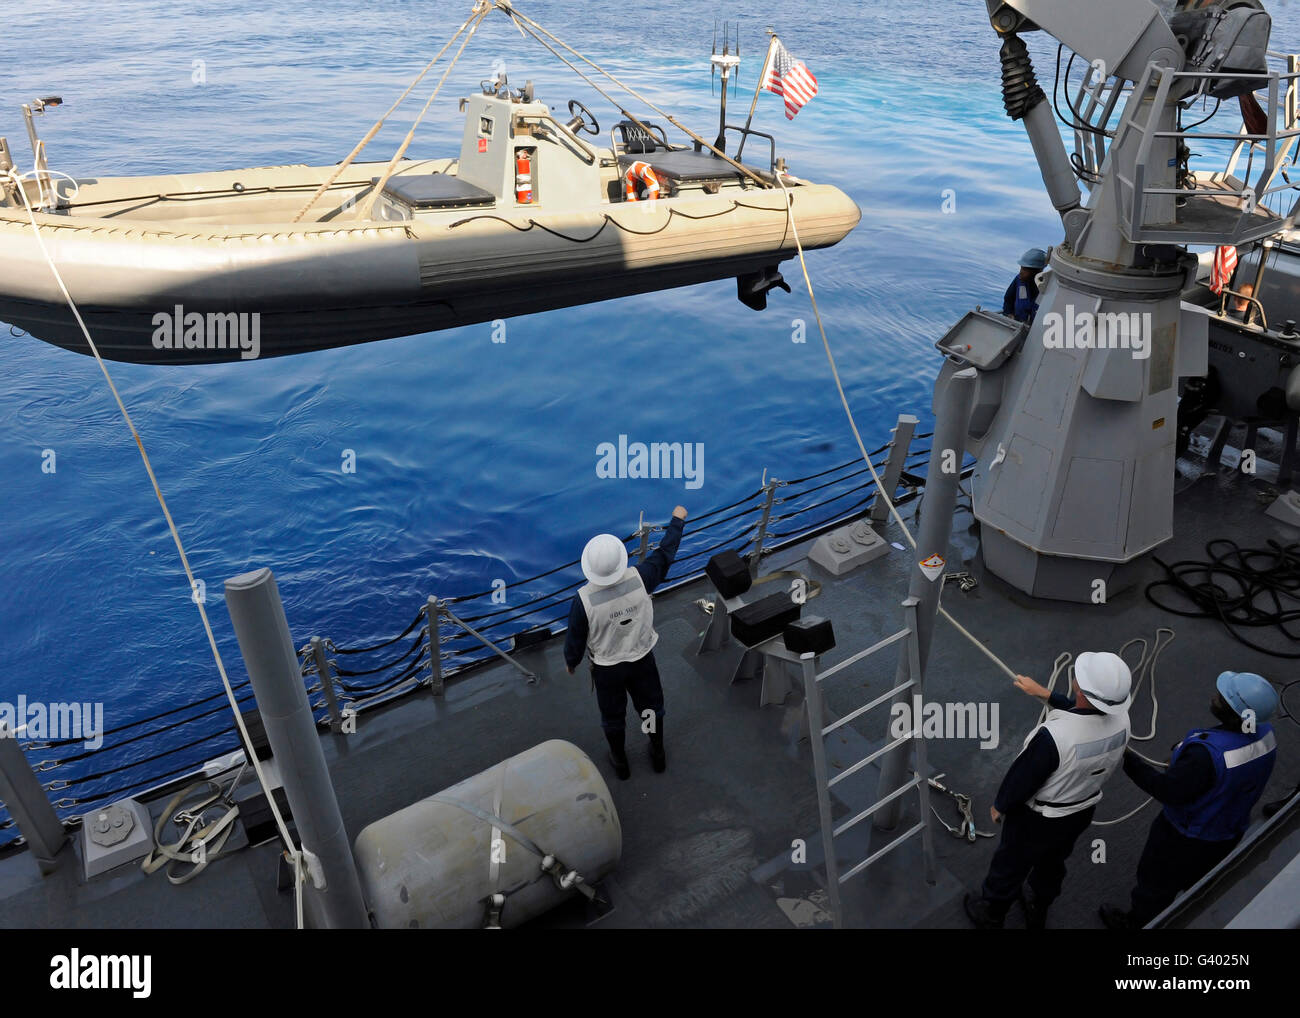 Sailors lower a rigid hull inflatable boat into the water. Stock Photo